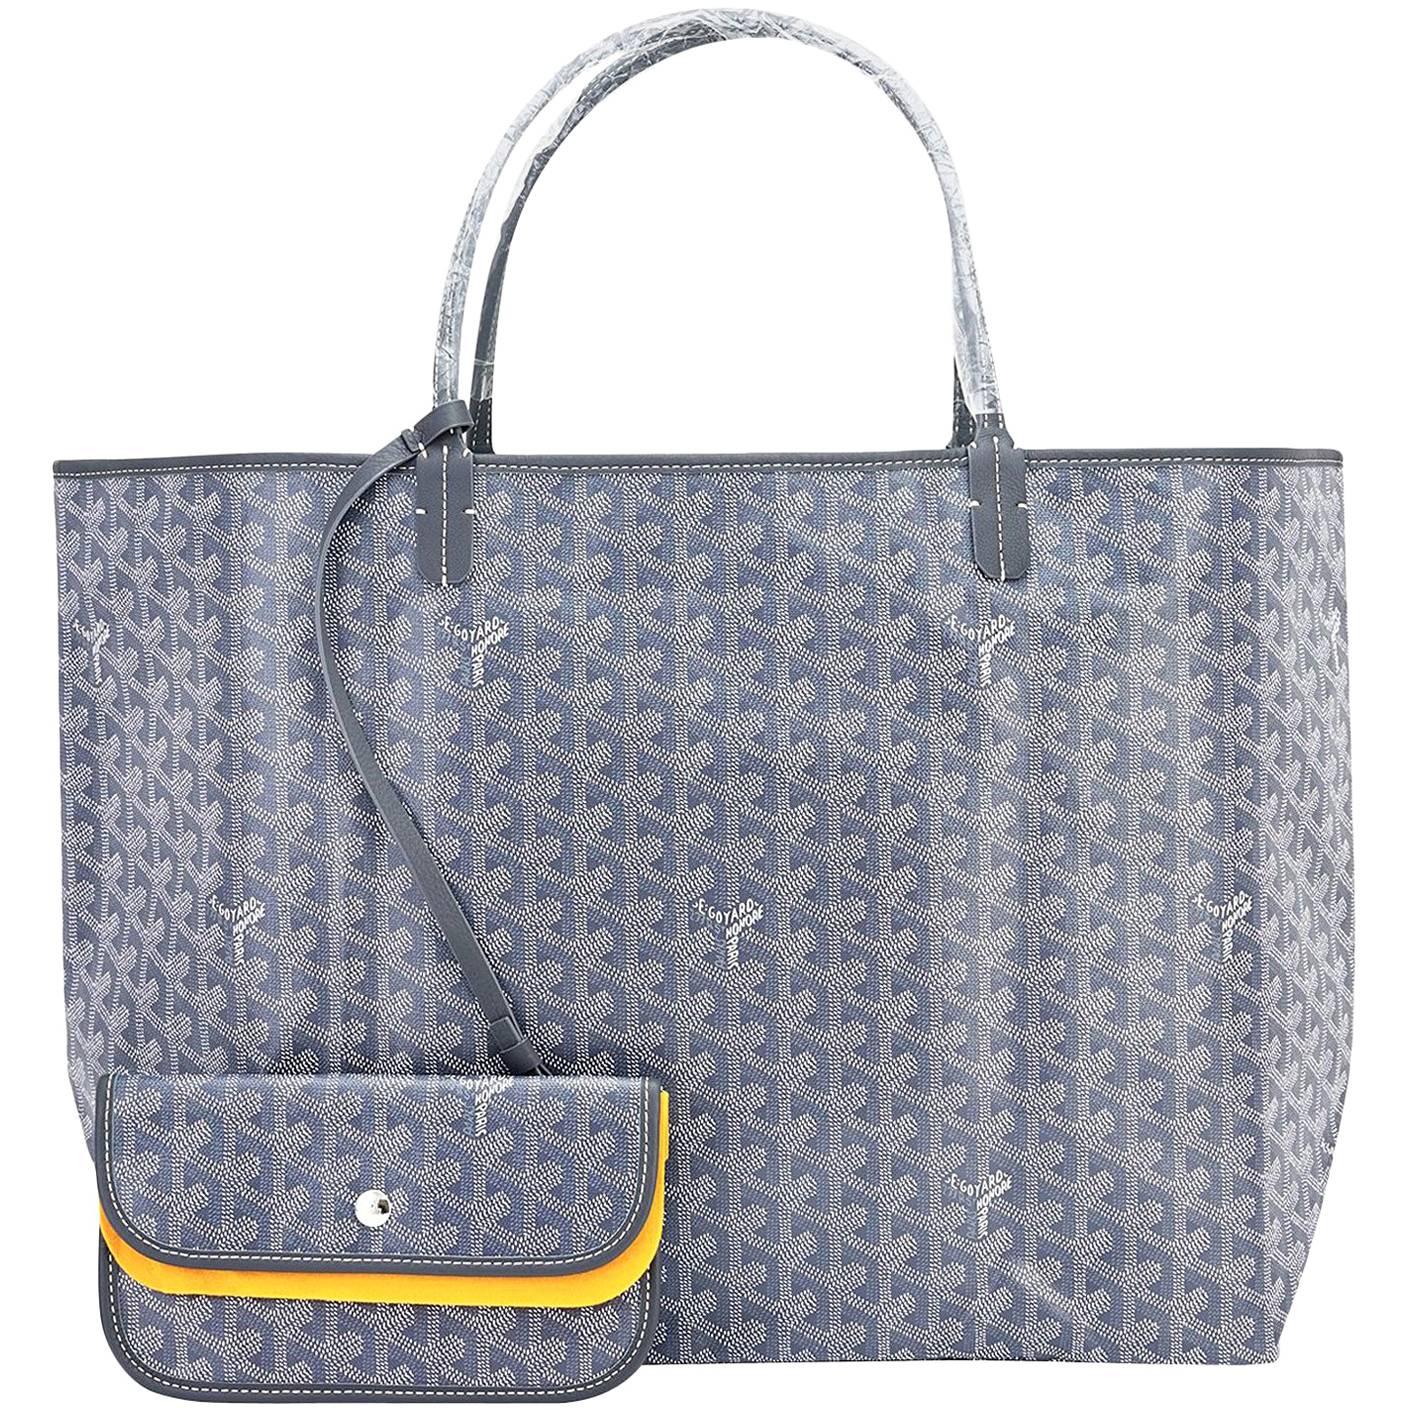 What are Goyard bags made from?